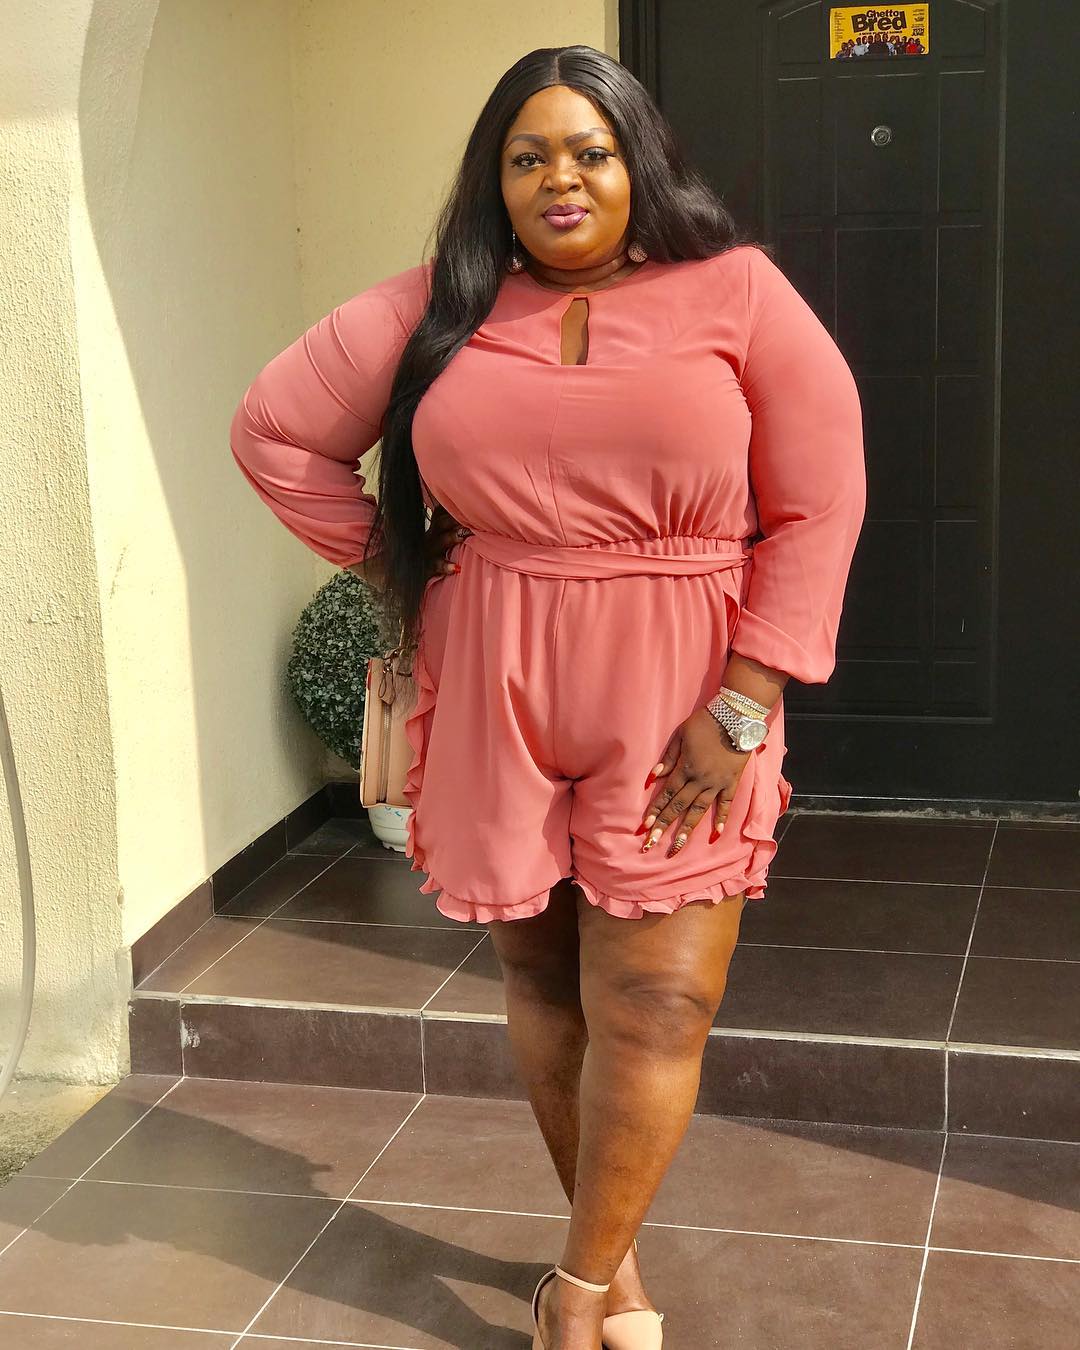 What Eniola Badmus Has To Say About People Who Body Shame Her On Social Media